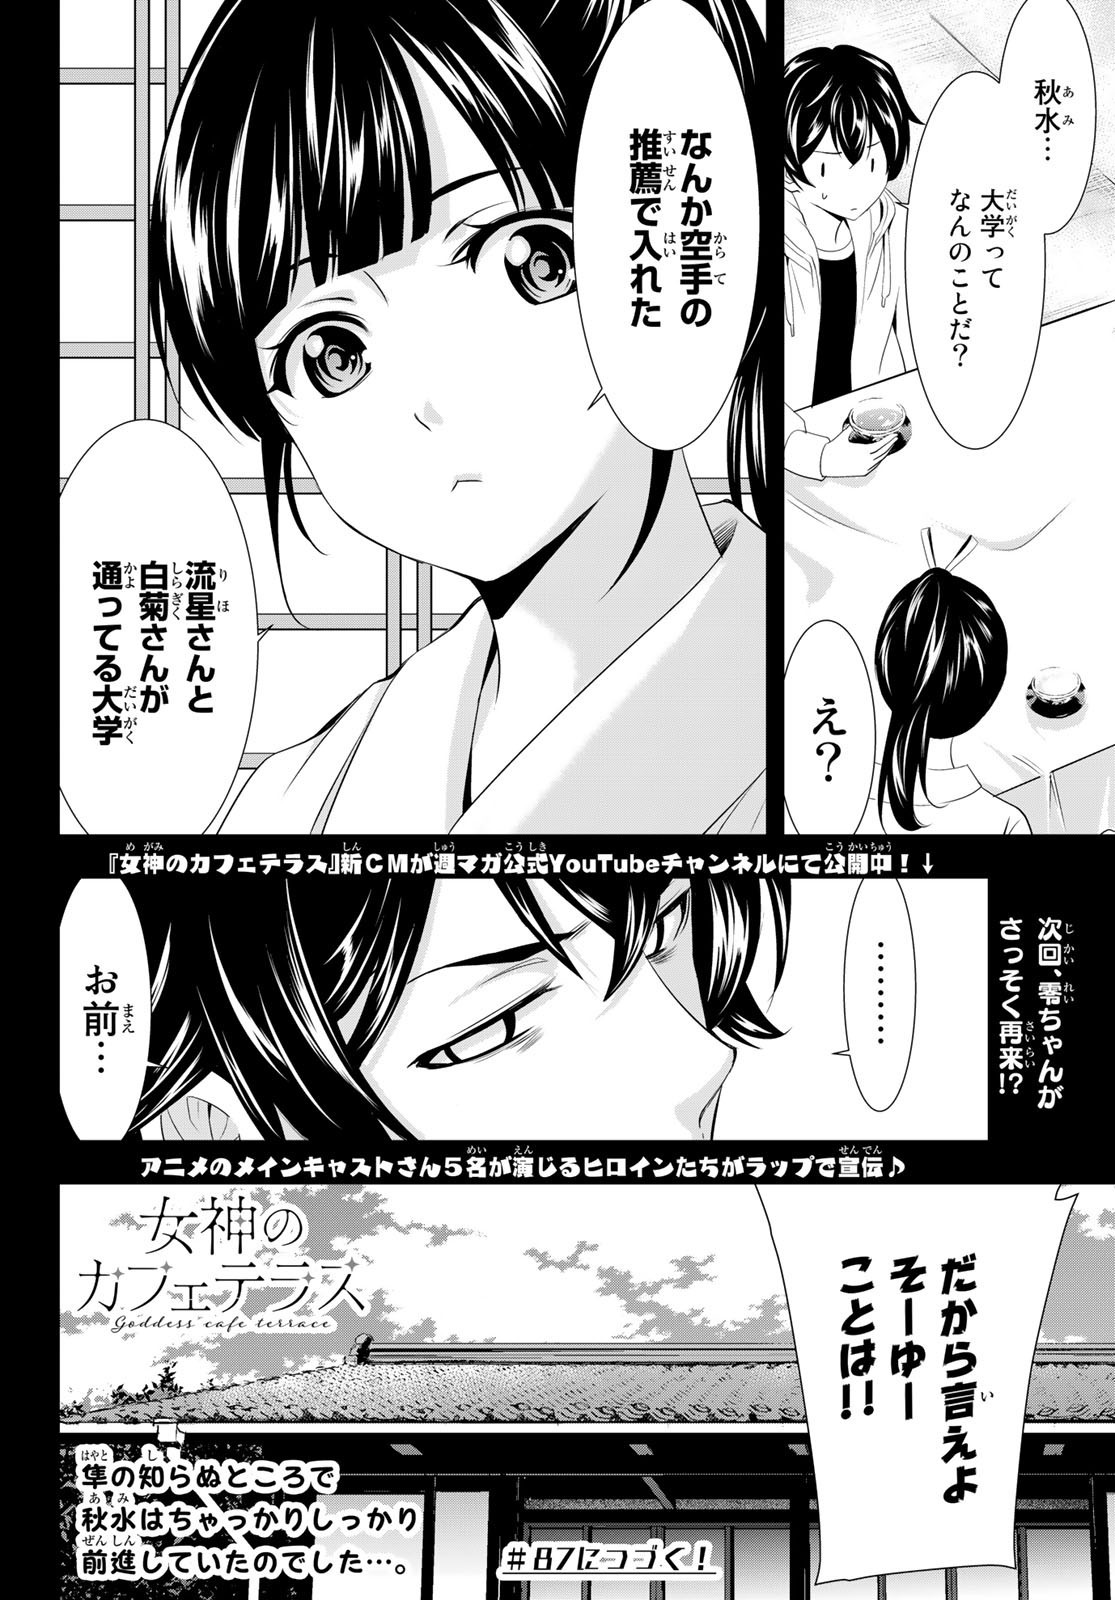 Goddess-Cafe-Terrace - Chapter 086 - Page 18